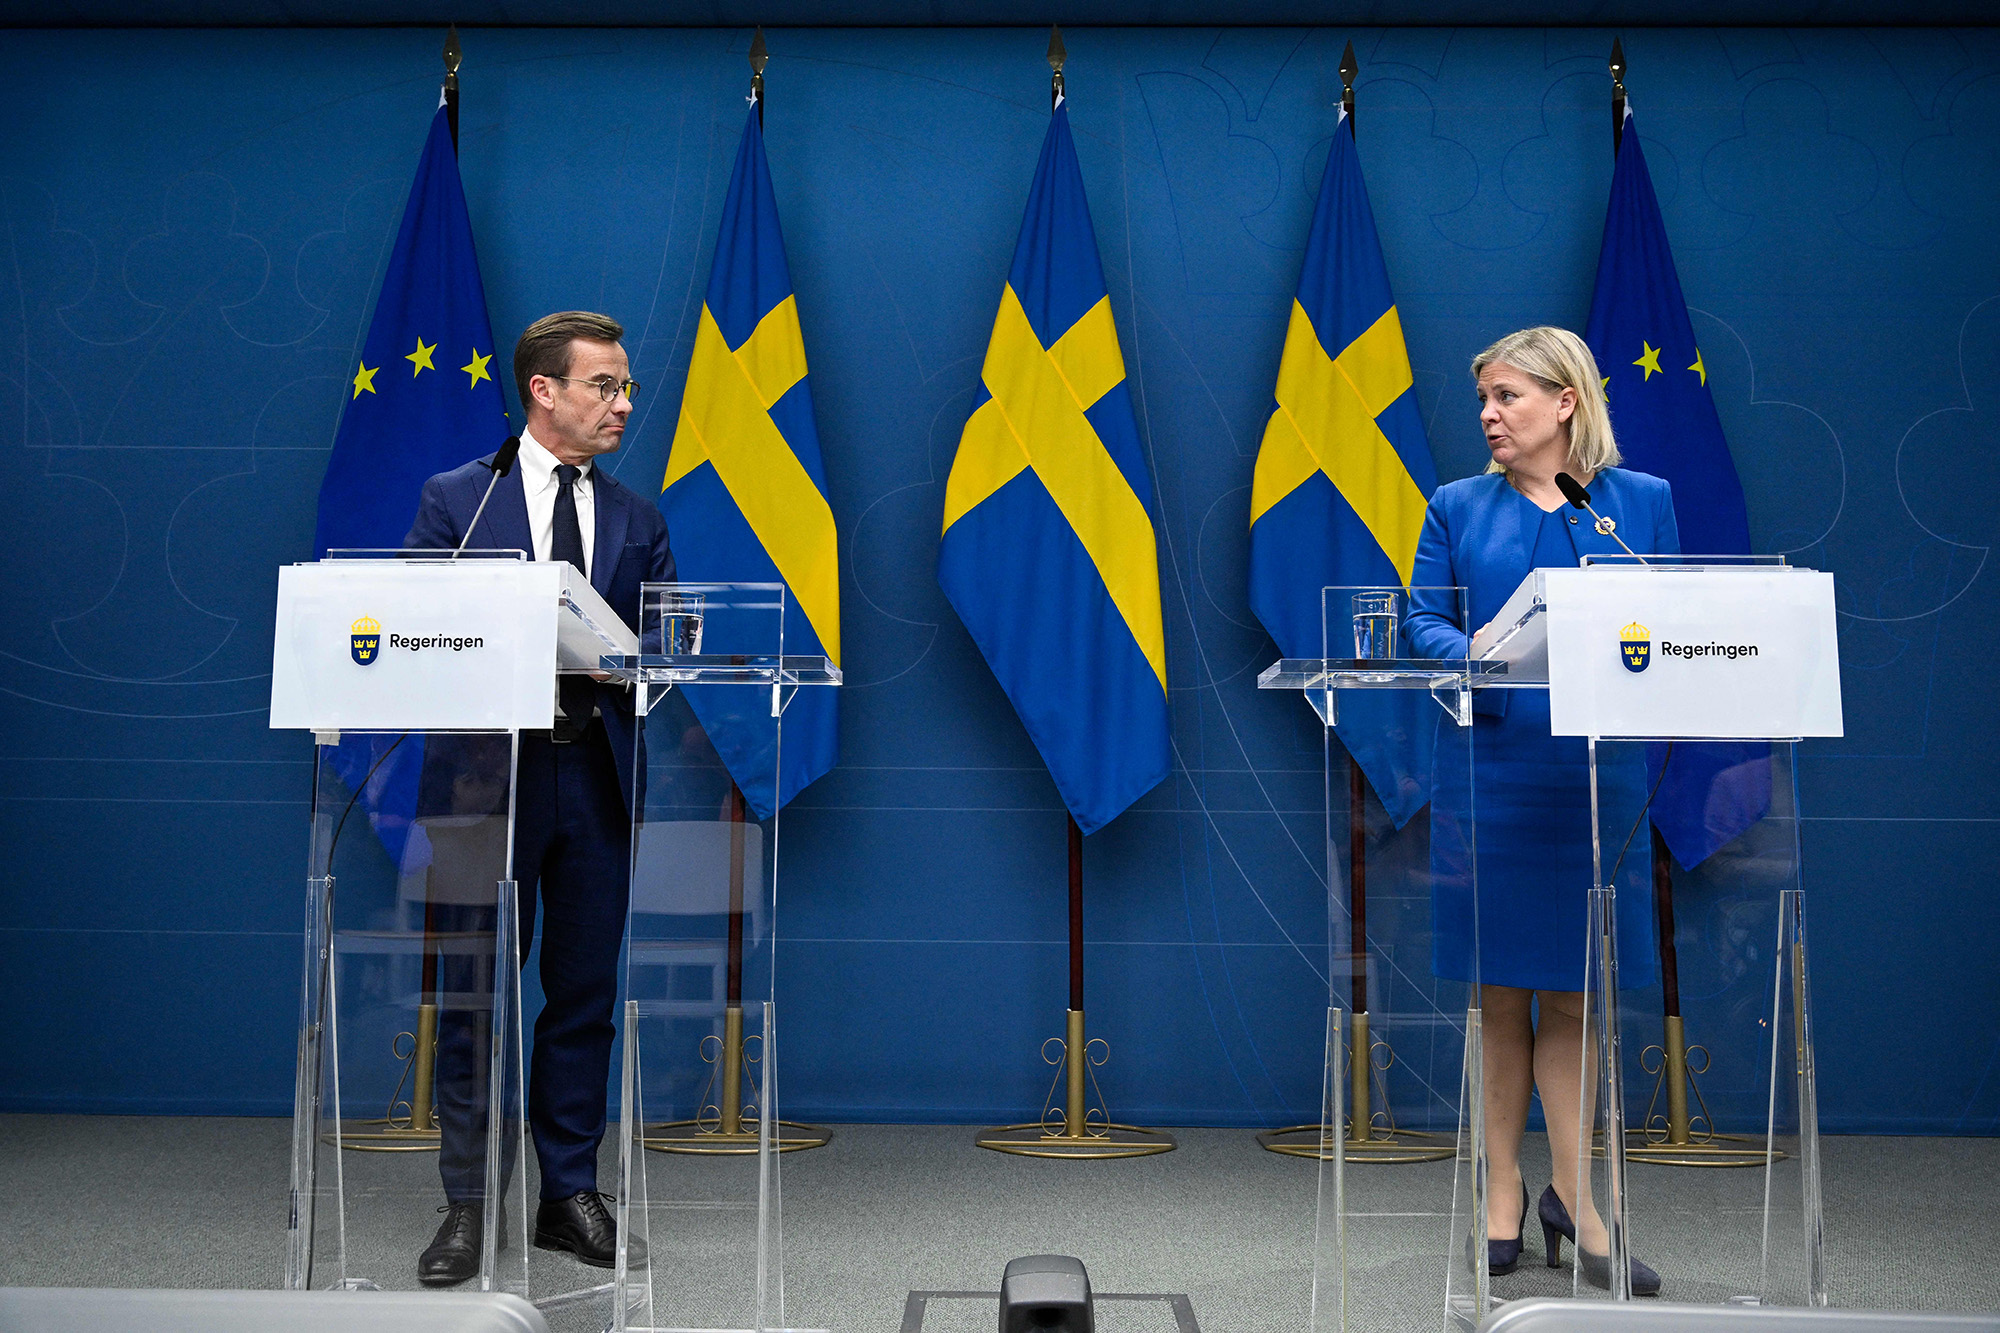 Sweden's Prime Minister Magdalena Andersson, right, and the Moderate Party's leader Ulf Kristersson address a news conference in Stockholm, Sweden, on May 16.